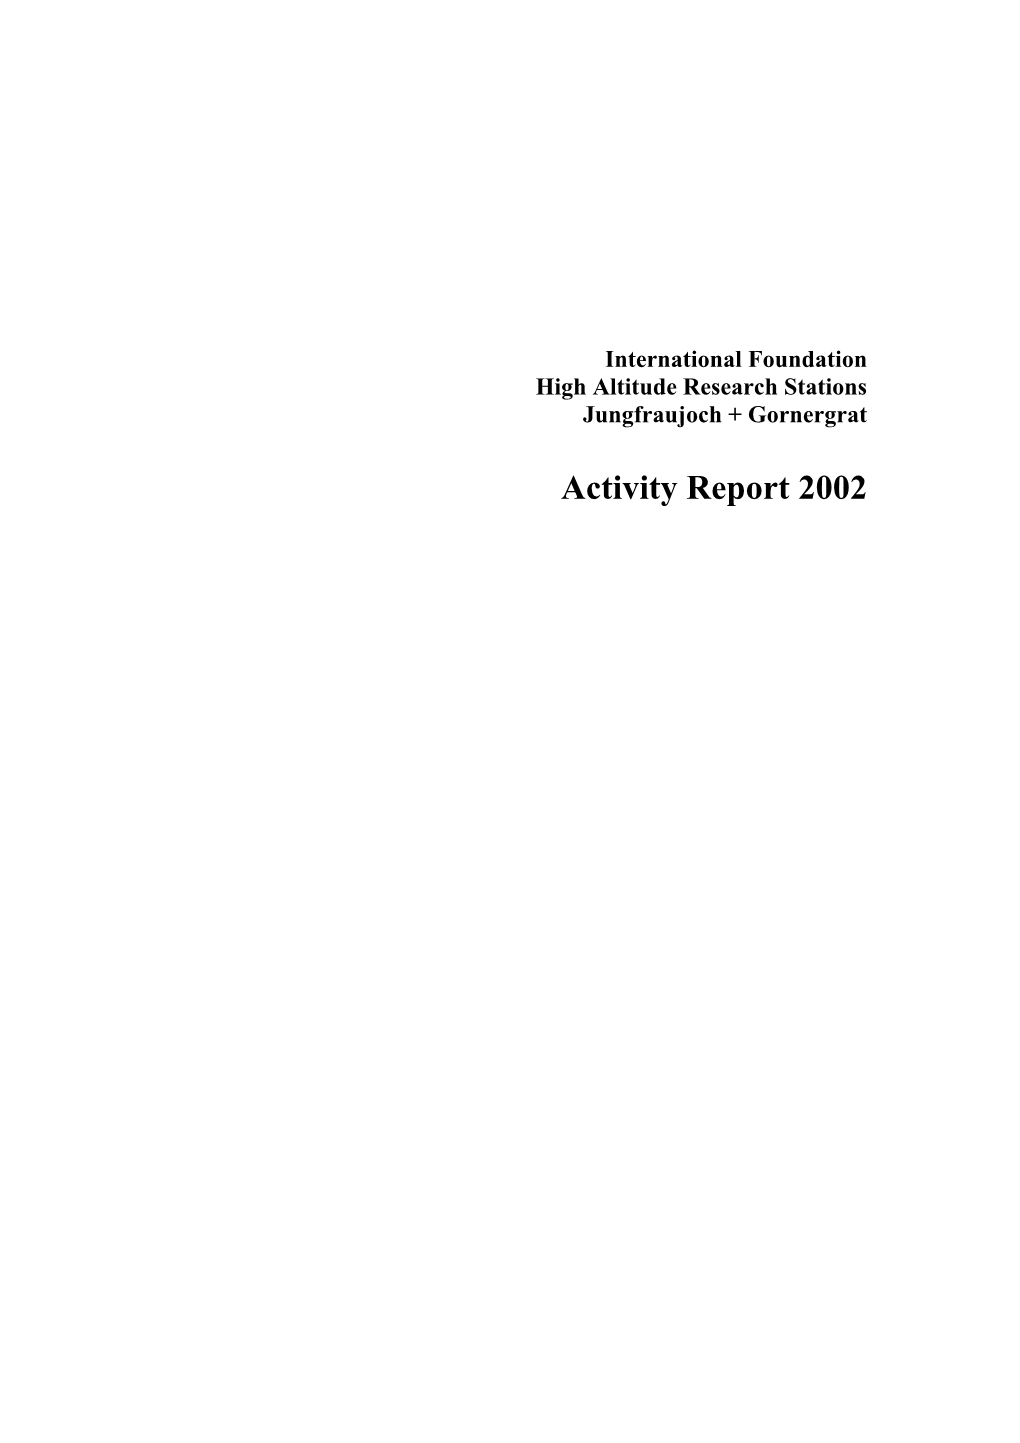 The Entire Activity Report 2002 for Download